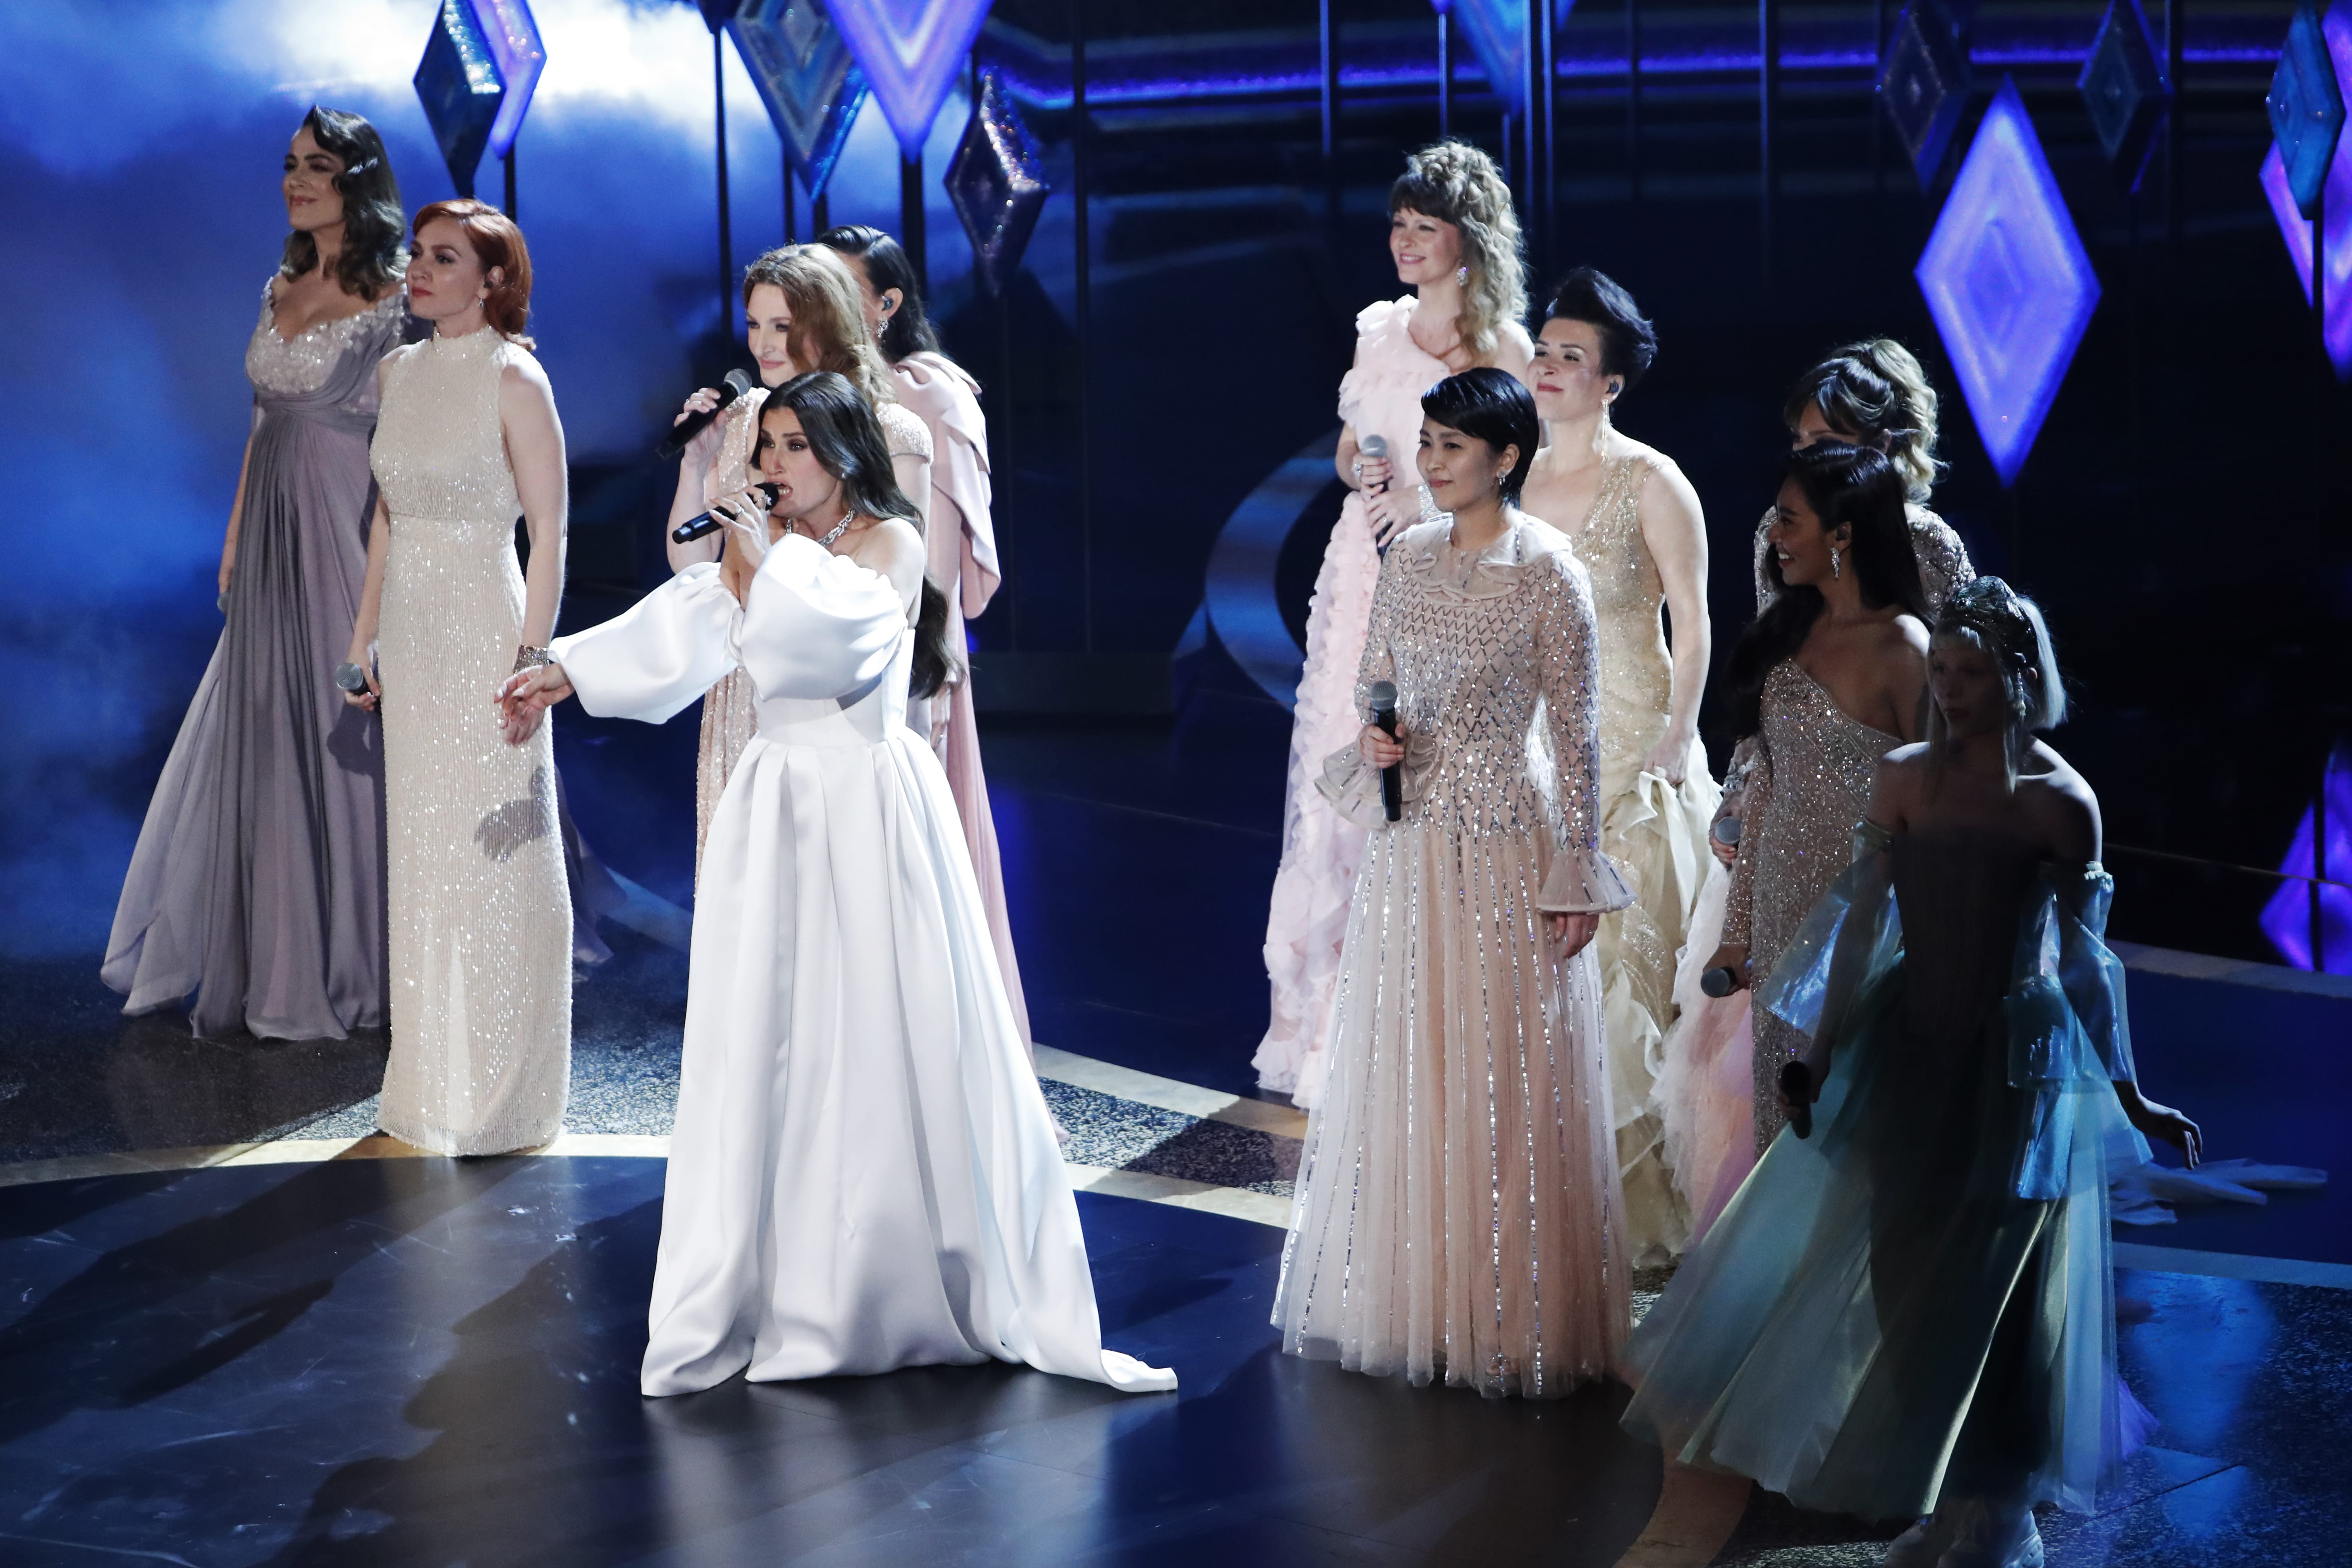 Idina Menzel on stage at the 92nd Academy Awards accompanied by Catalan singer Gisela and other international Frozen 2 singers (by Reuters/Mario Anzuoni)